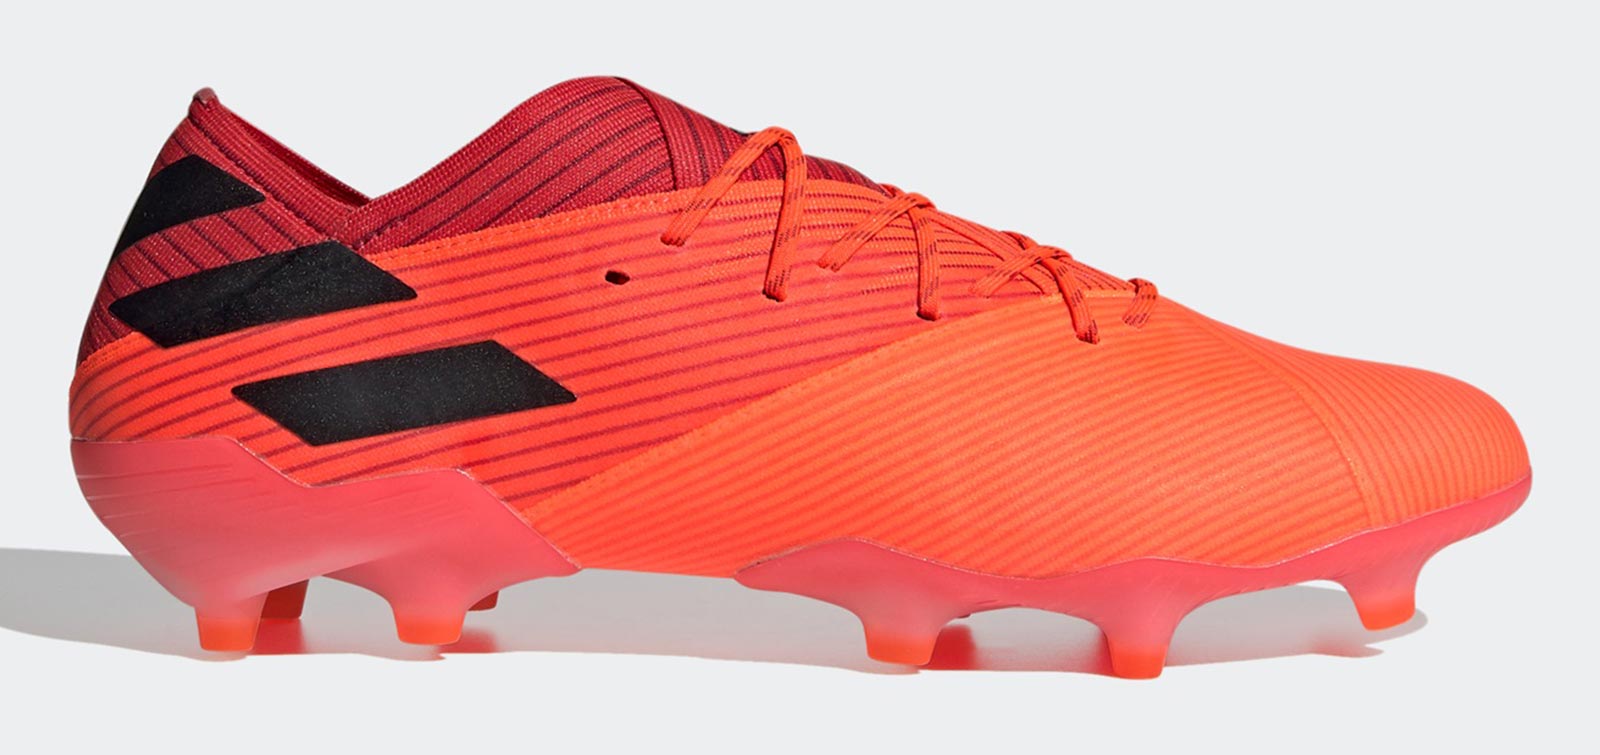 messi soccer cleats 2020